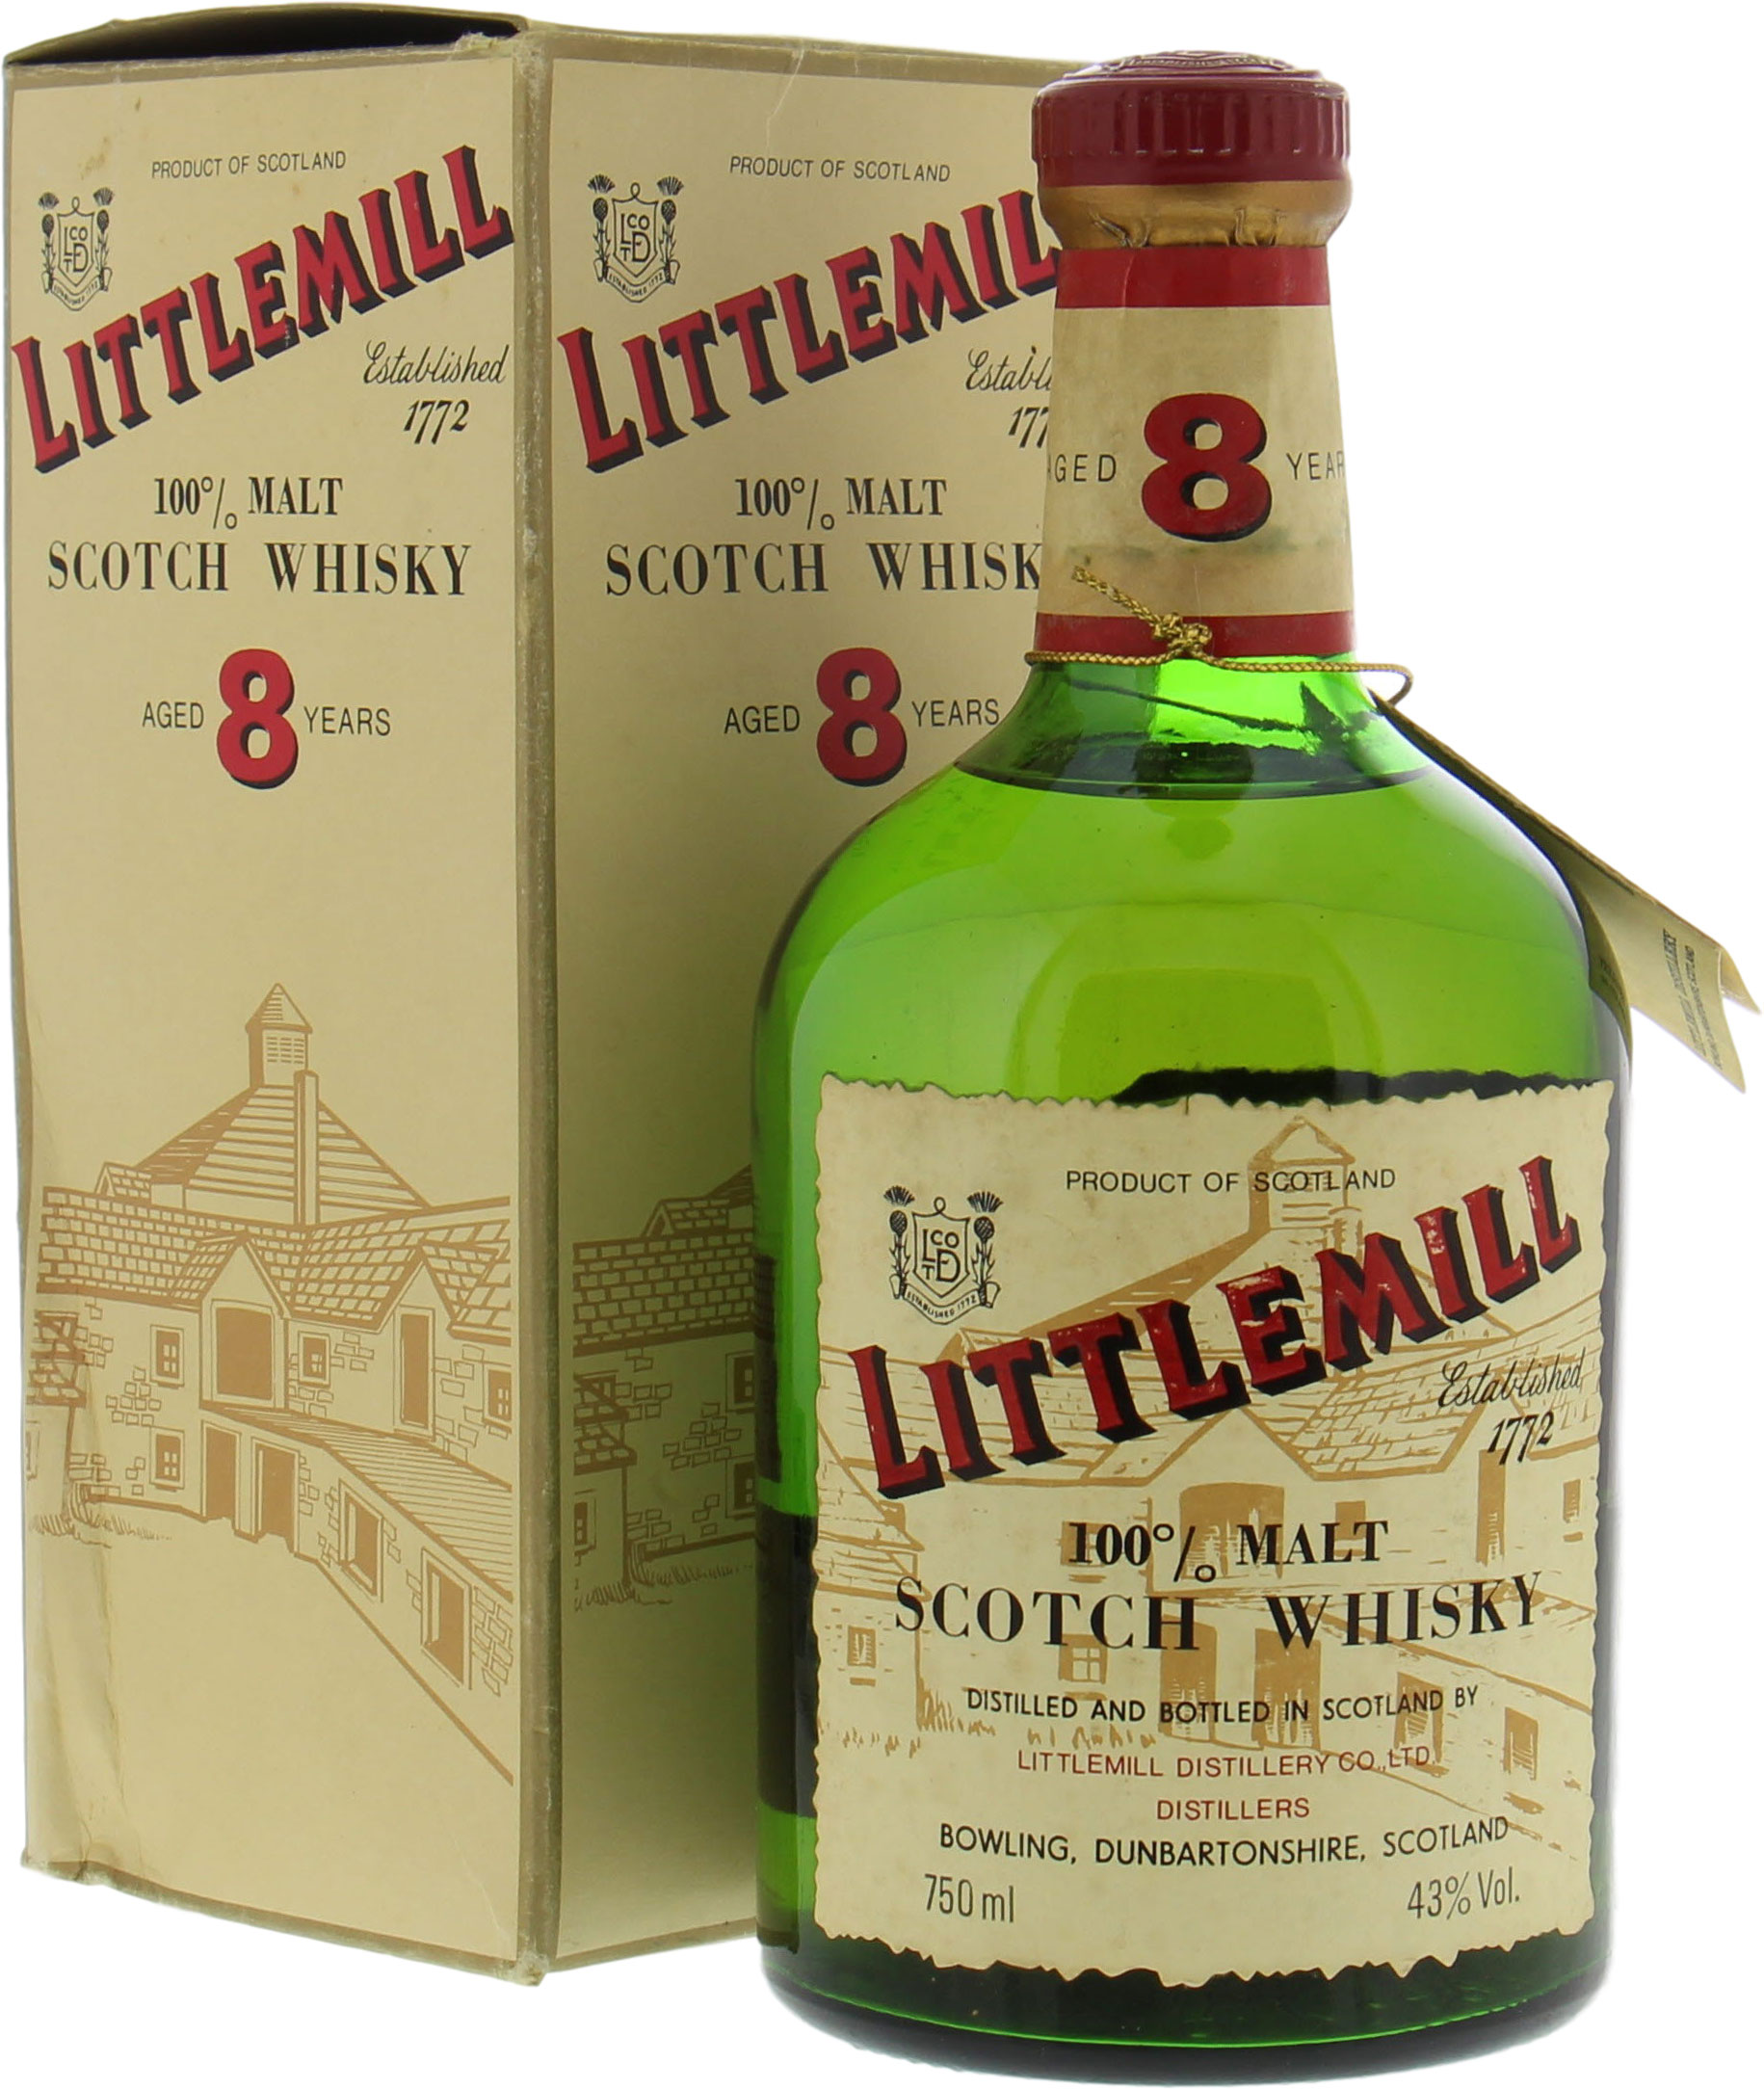 Littlemill - 8 Years Old Green Dumpy Red Capsule 43% NV In Original Container